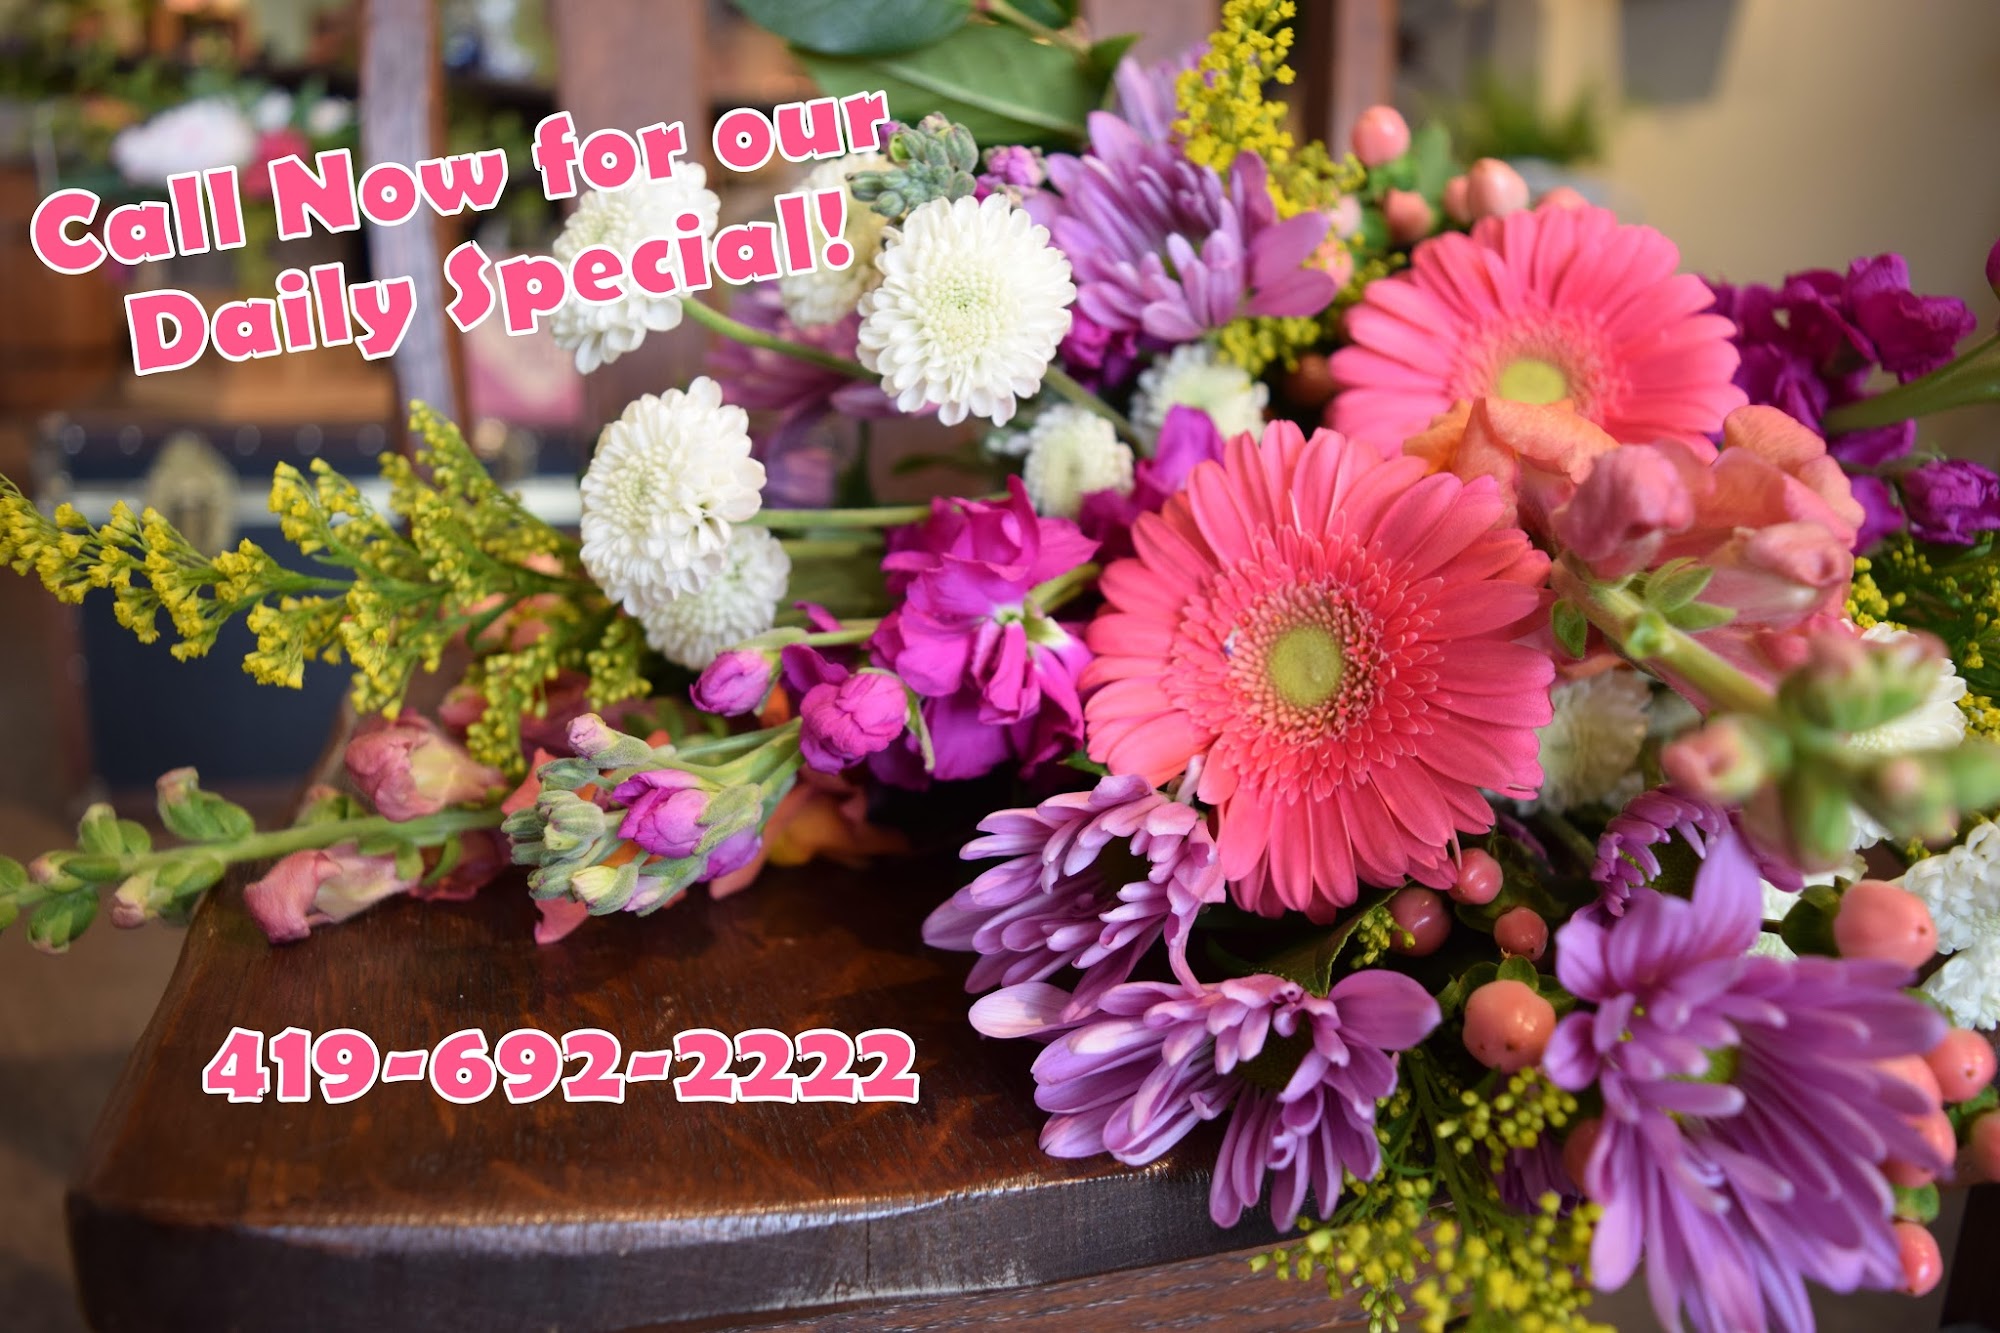 Ivy Hutch Flowers and Gifts 660 Elida Ave, Delphos Ohio 45833